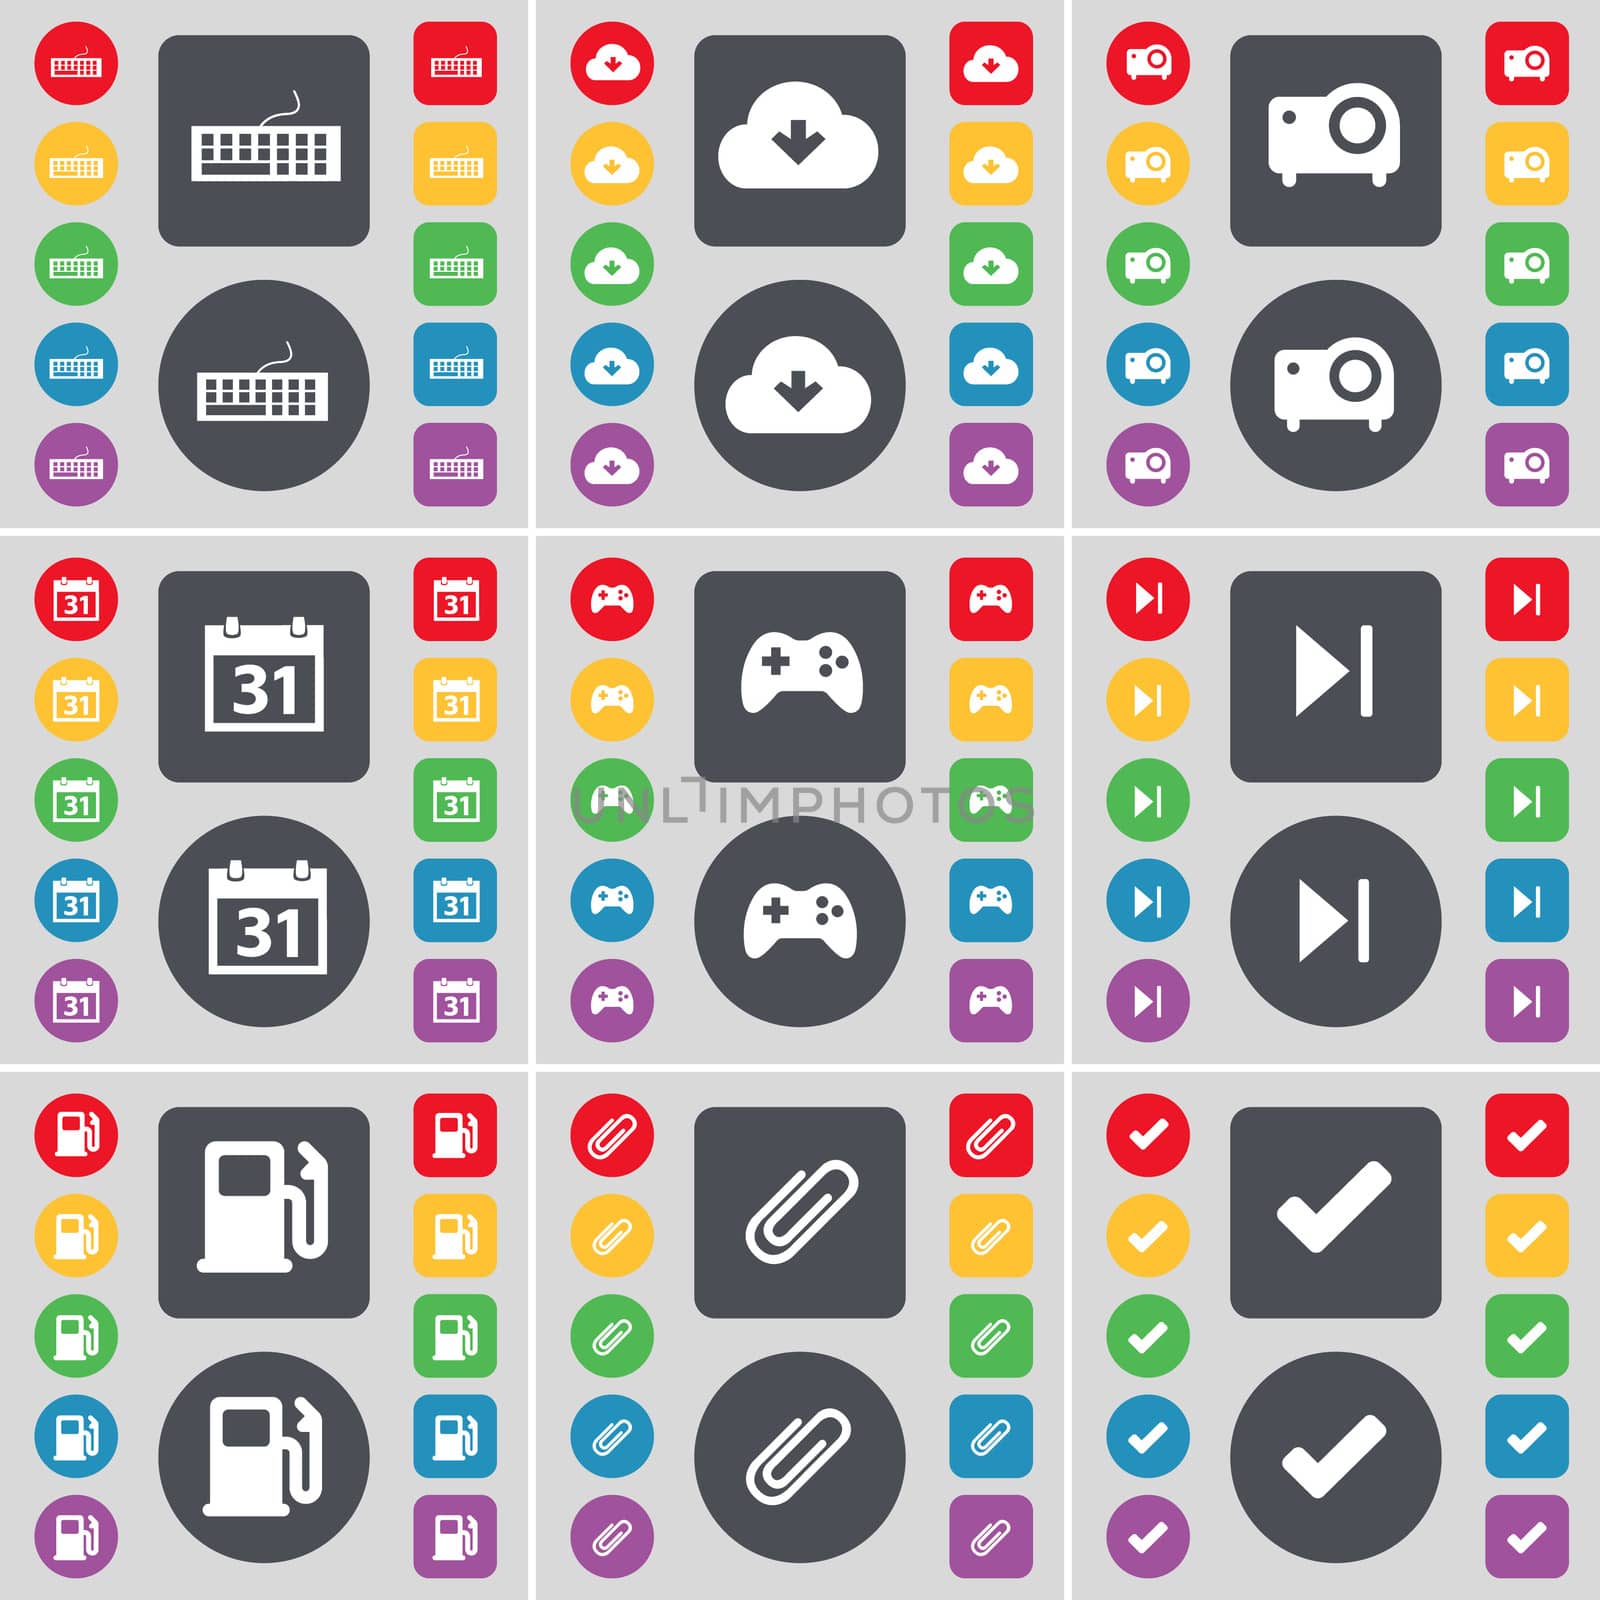 Keyboard, Cloud, Projector, Calendar, Gamepad, Media skip, Gas station, Clip, Tick icon symbol. A large set of flat, colored buttons for your design. illustration